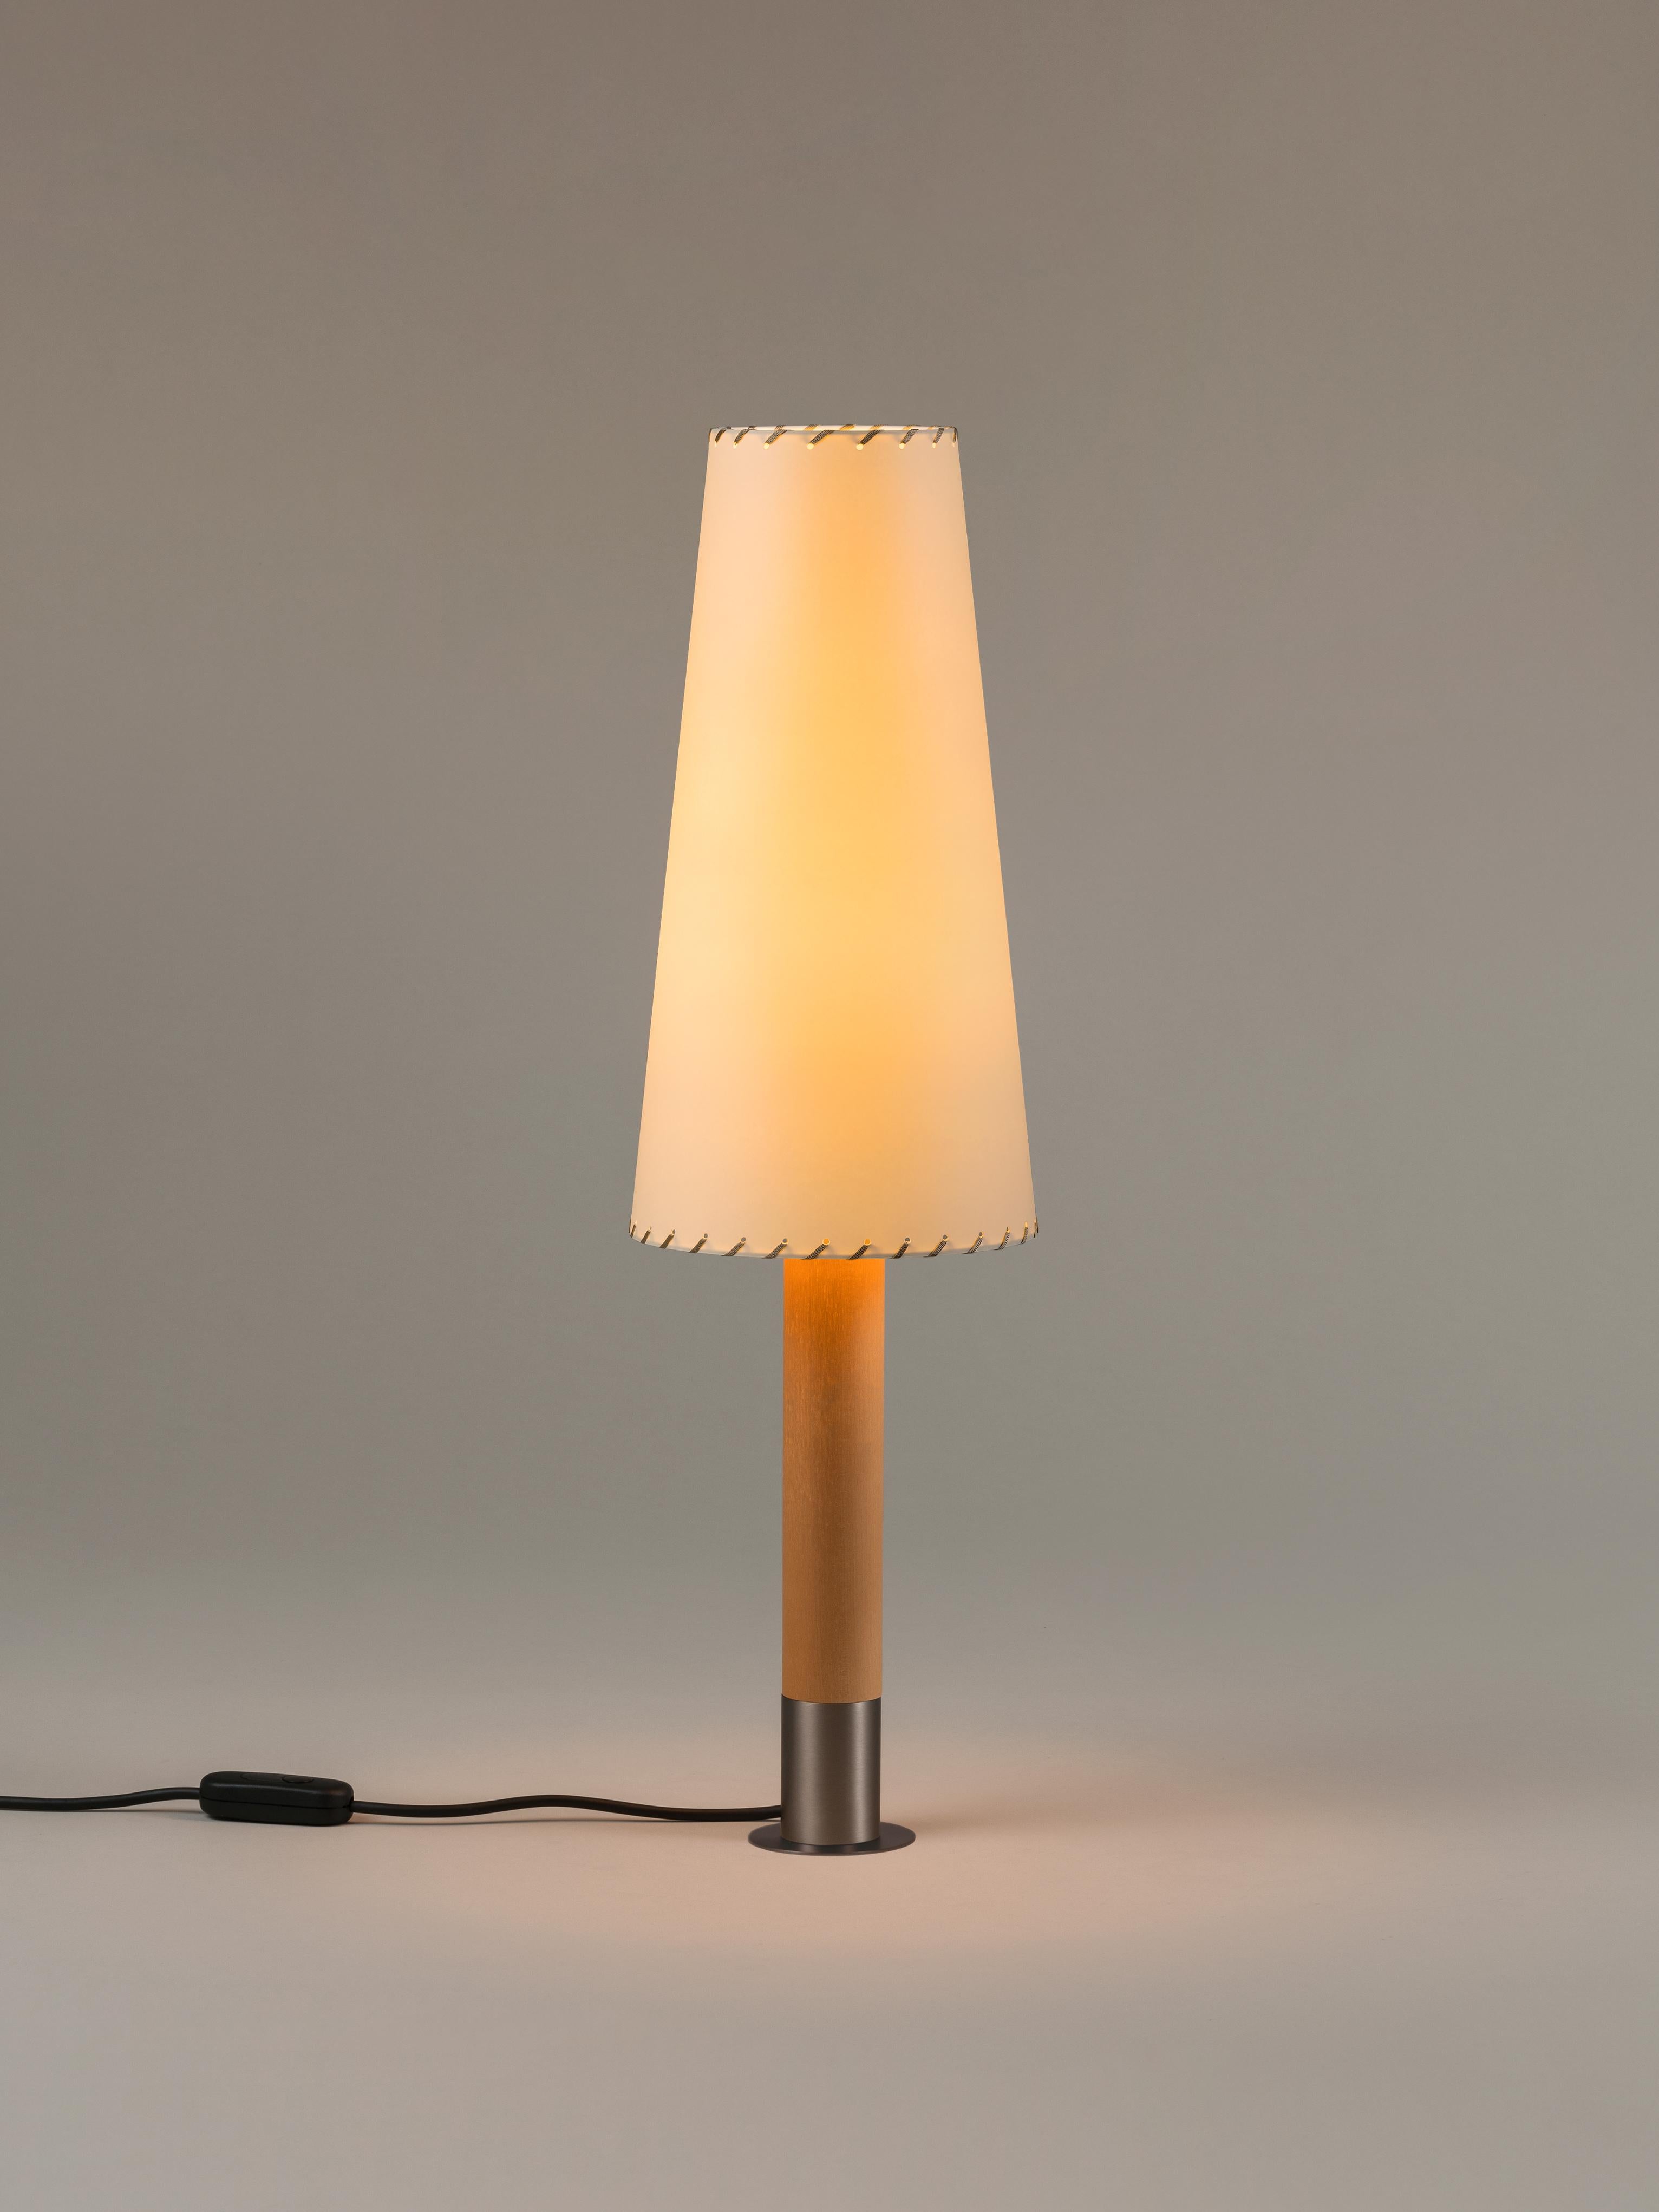 Nickel Básica M2 table lamp by Santiago Roqueta, Santa & Cole.
Dimensions: D 20 x H 71 cm.
Materials: Nickel, birch wood, paperboard.
Available in nickel or bronze and with or without the stabilizing disc.

The Básica lamp champions the return